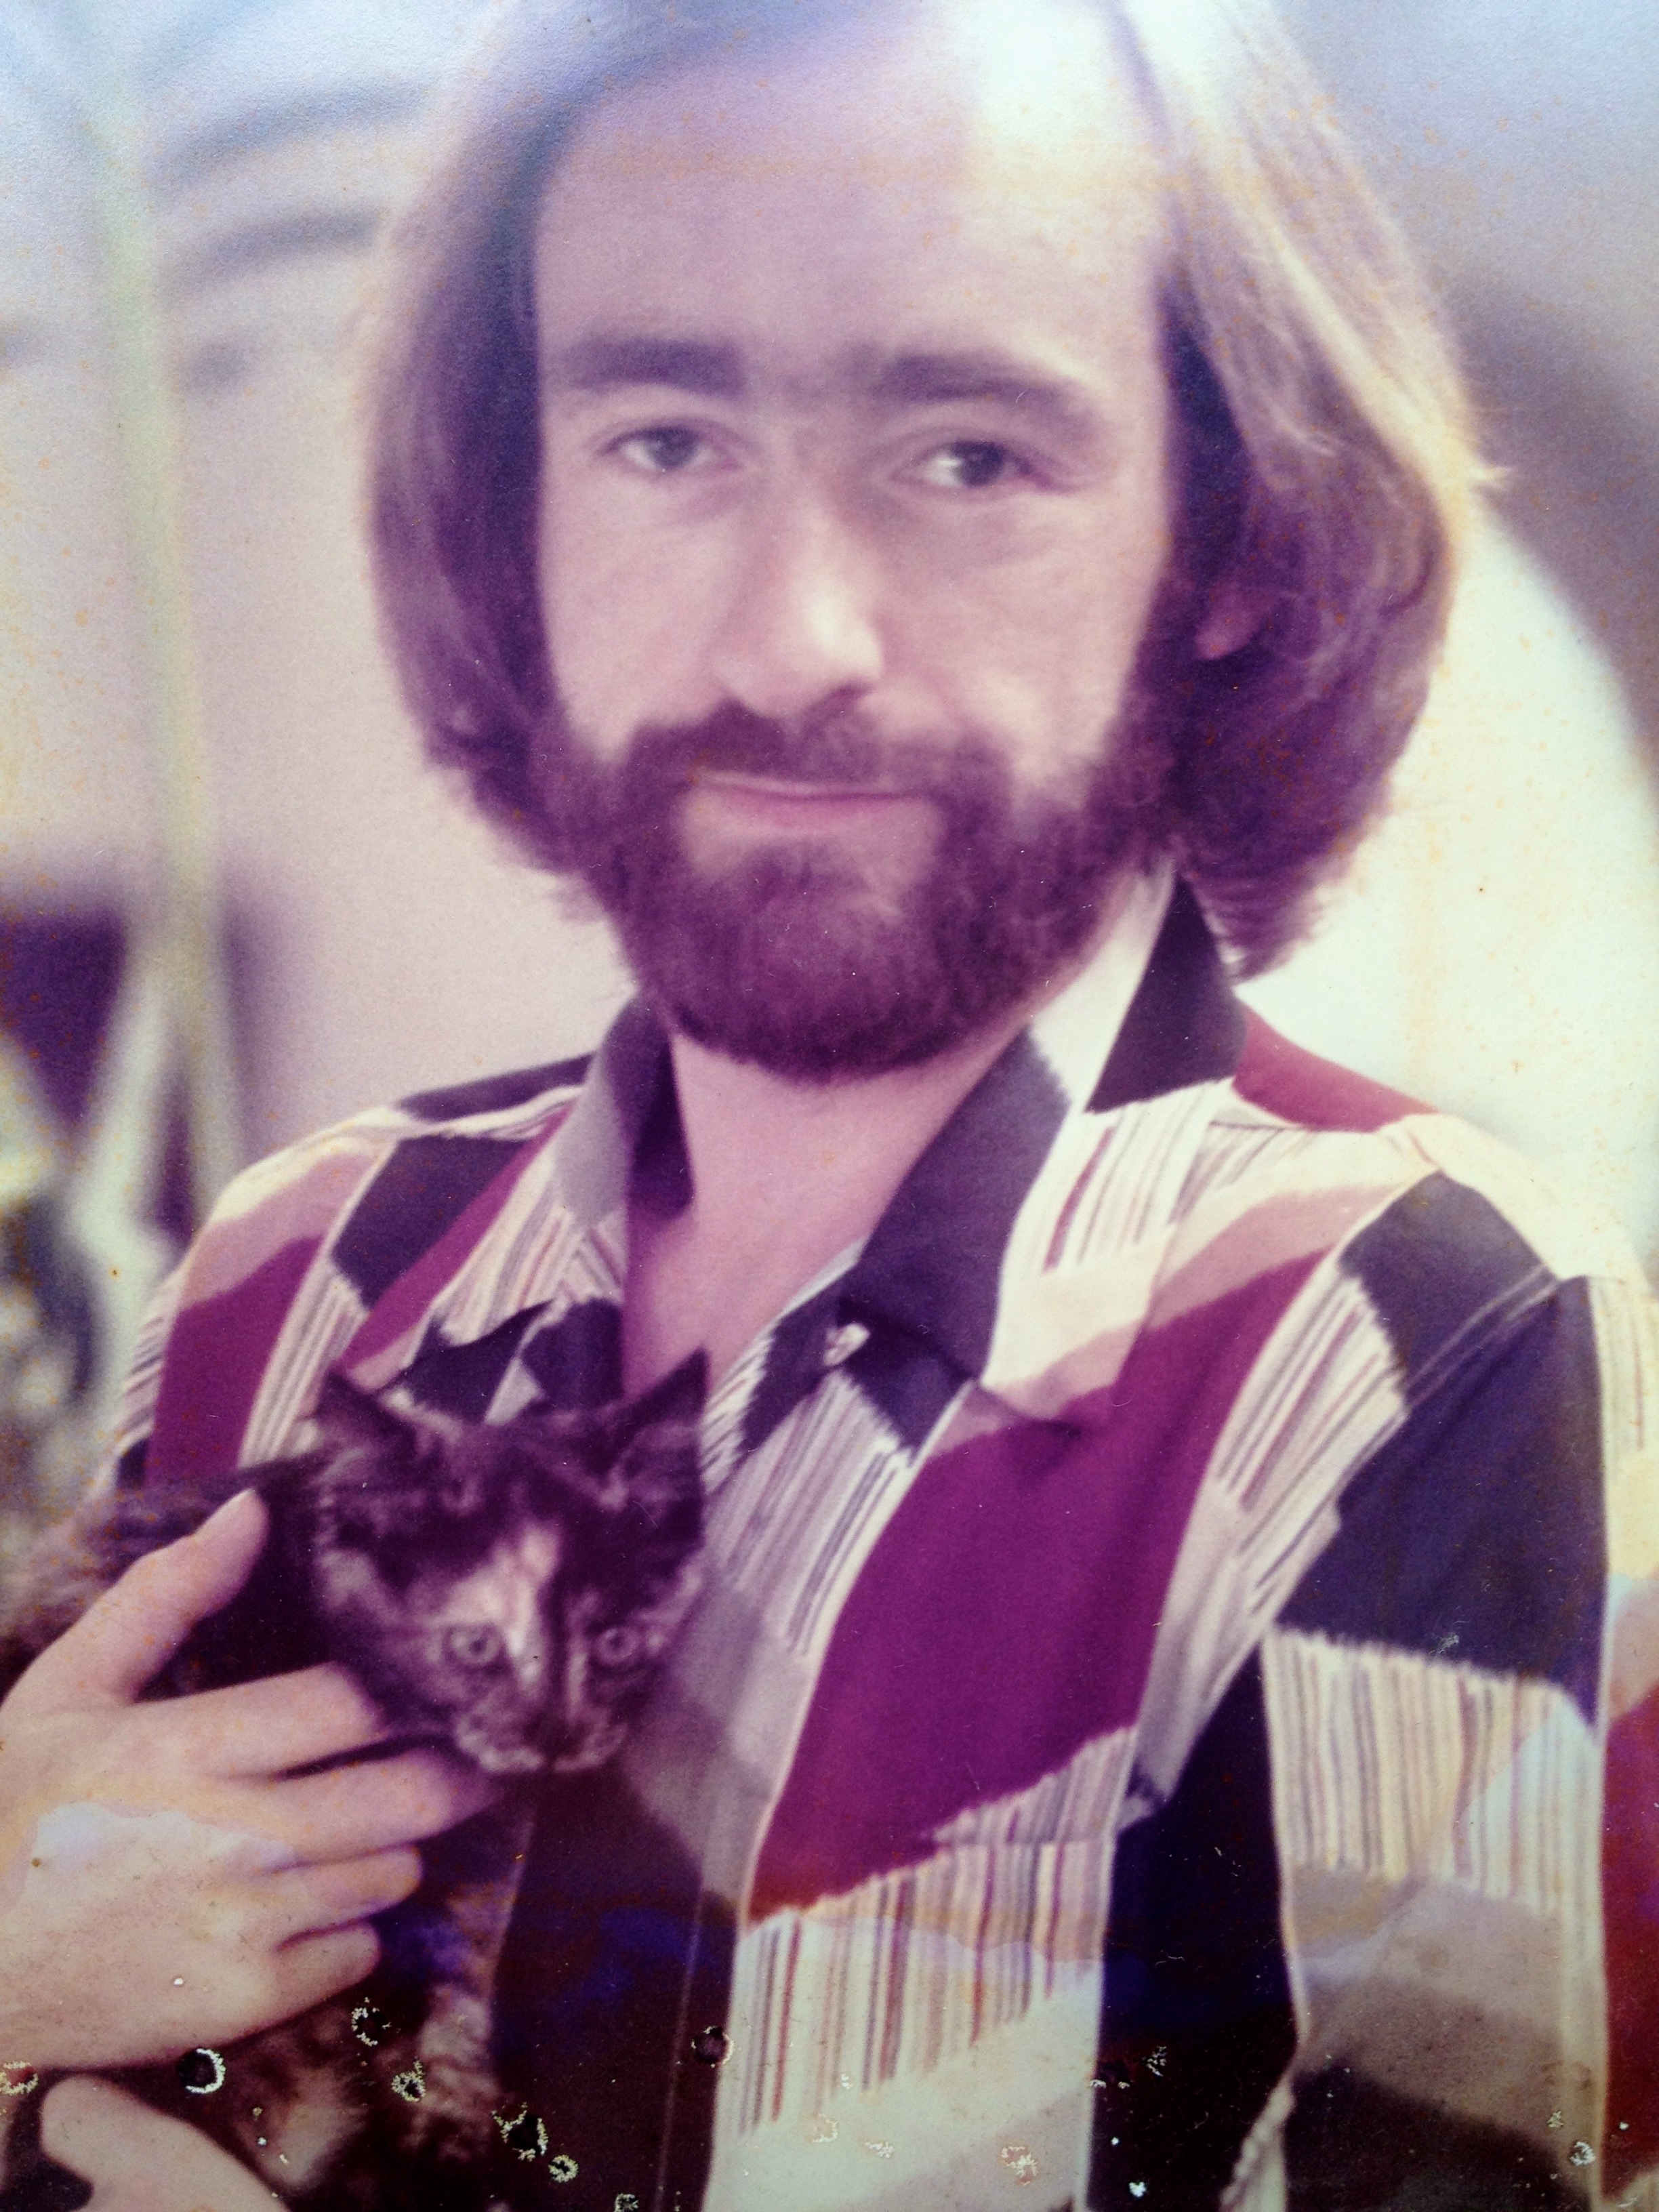 Dave with cat 70's.jpg